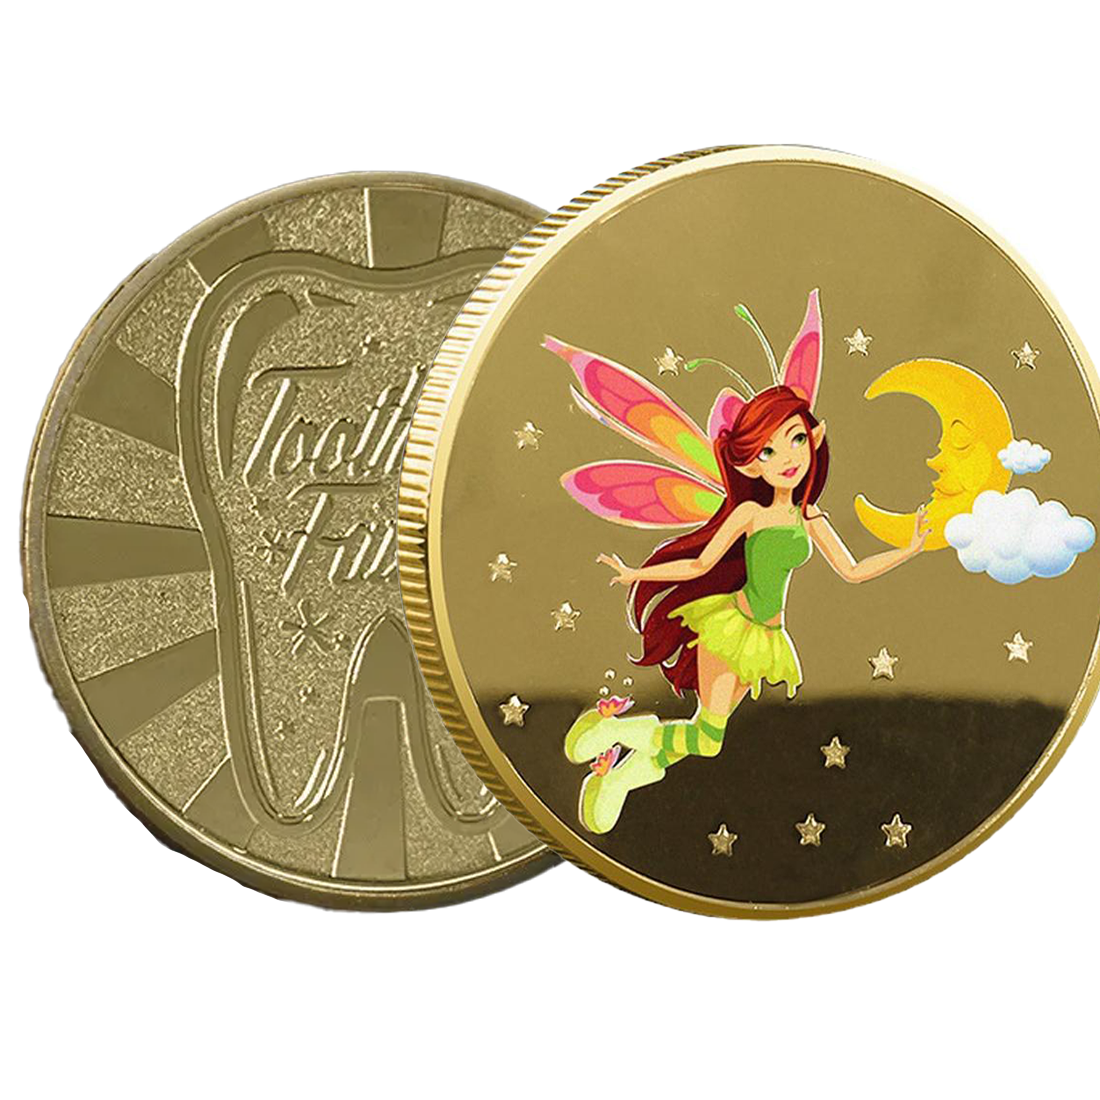 The Tooth Fairy Gold Commemorative Coin